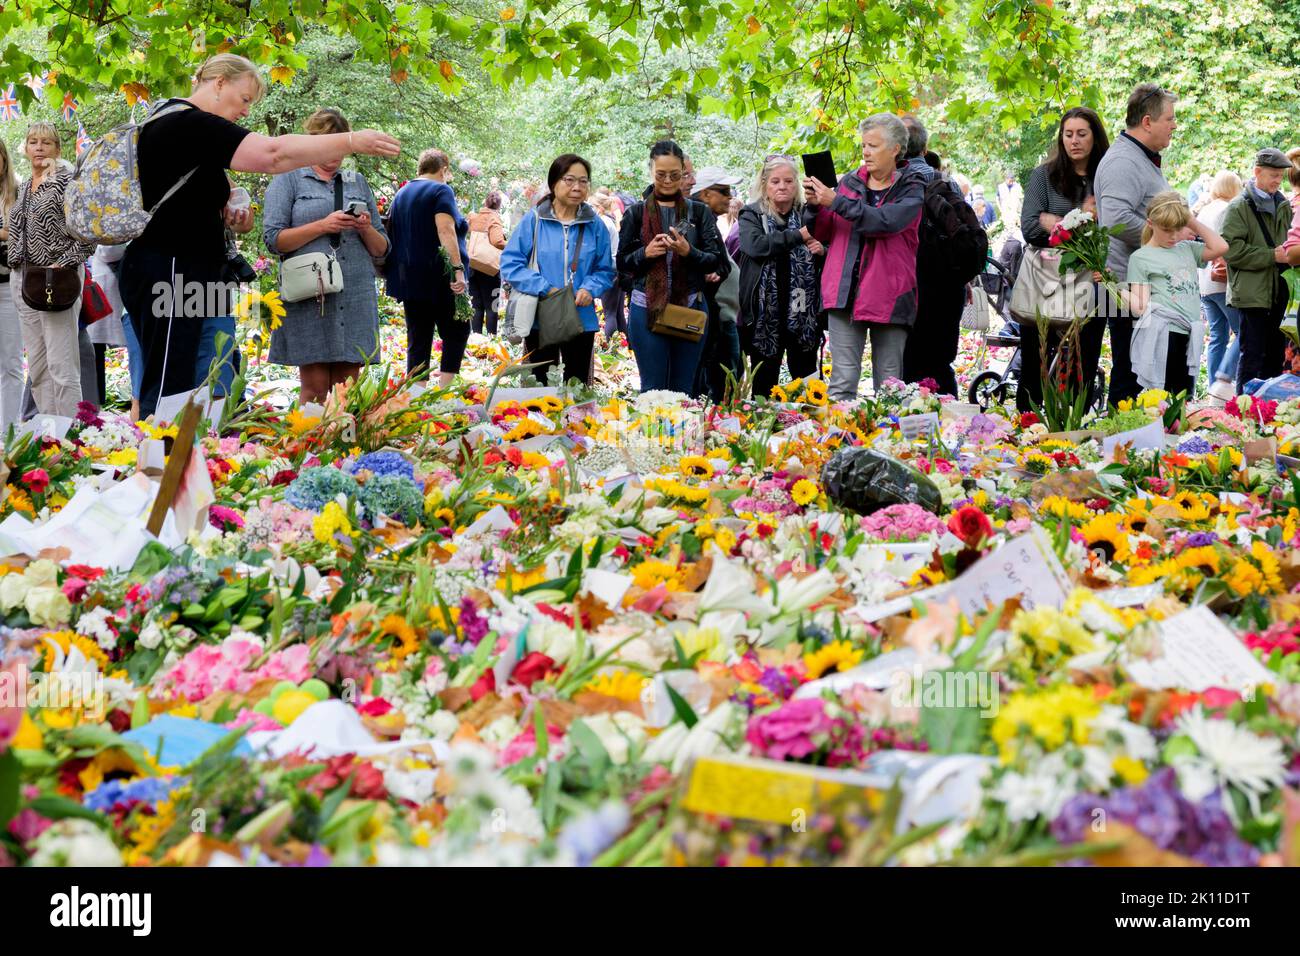 London, UK. 14th Sep, 2022. As crowds of people came to London to watch Her Majesty the Queen's coffin being transported to the Palace of Westminster, people are pictured as they view the flowers cards, bears and other tributes that have been left in Green Park, London. Credit: Lynchpics/Alamy Live News Stock Photo